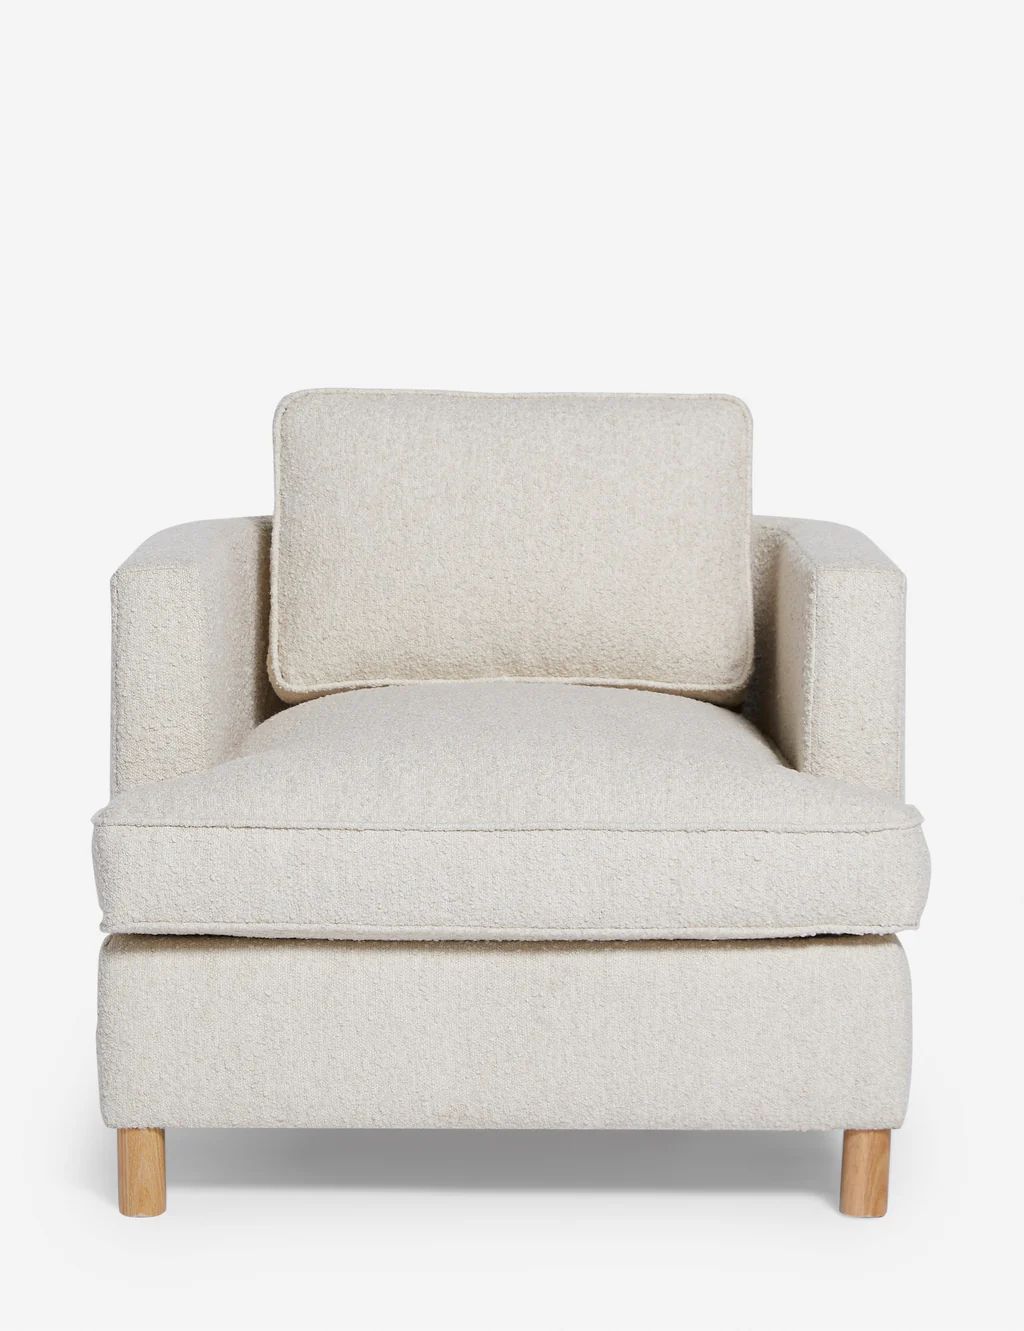 Belmont Accent Chair | Lulu and Georgia 